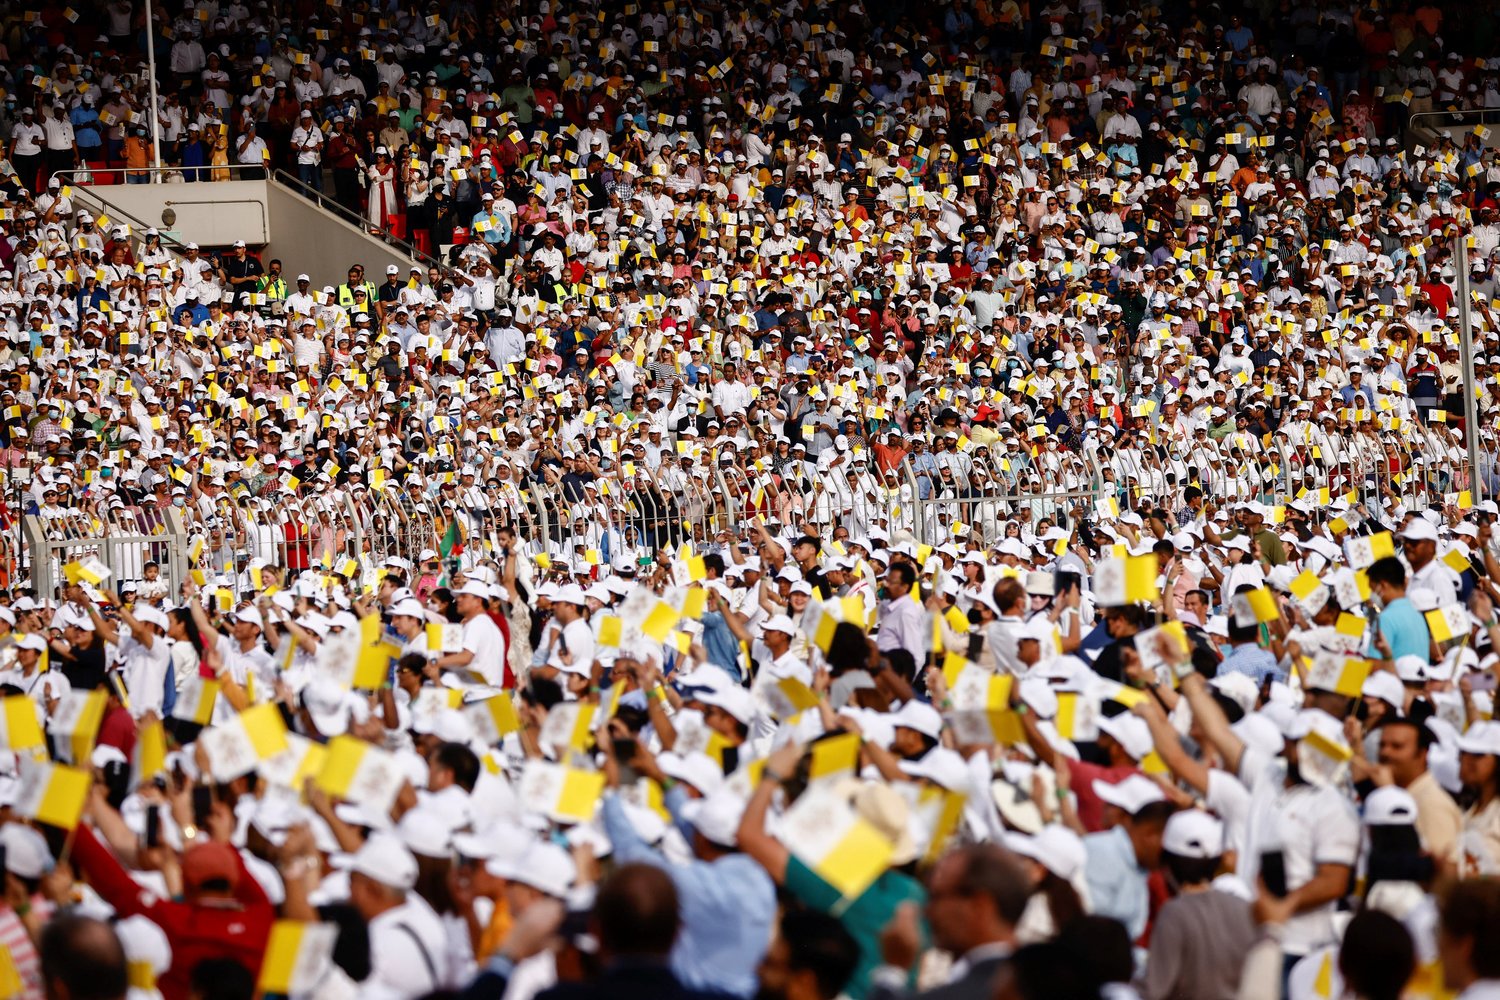 People wave Vatican flags as Pope Francis celebrates Mass at Bahrain National Stadium in Awali, Bahrain, Nov. 5.